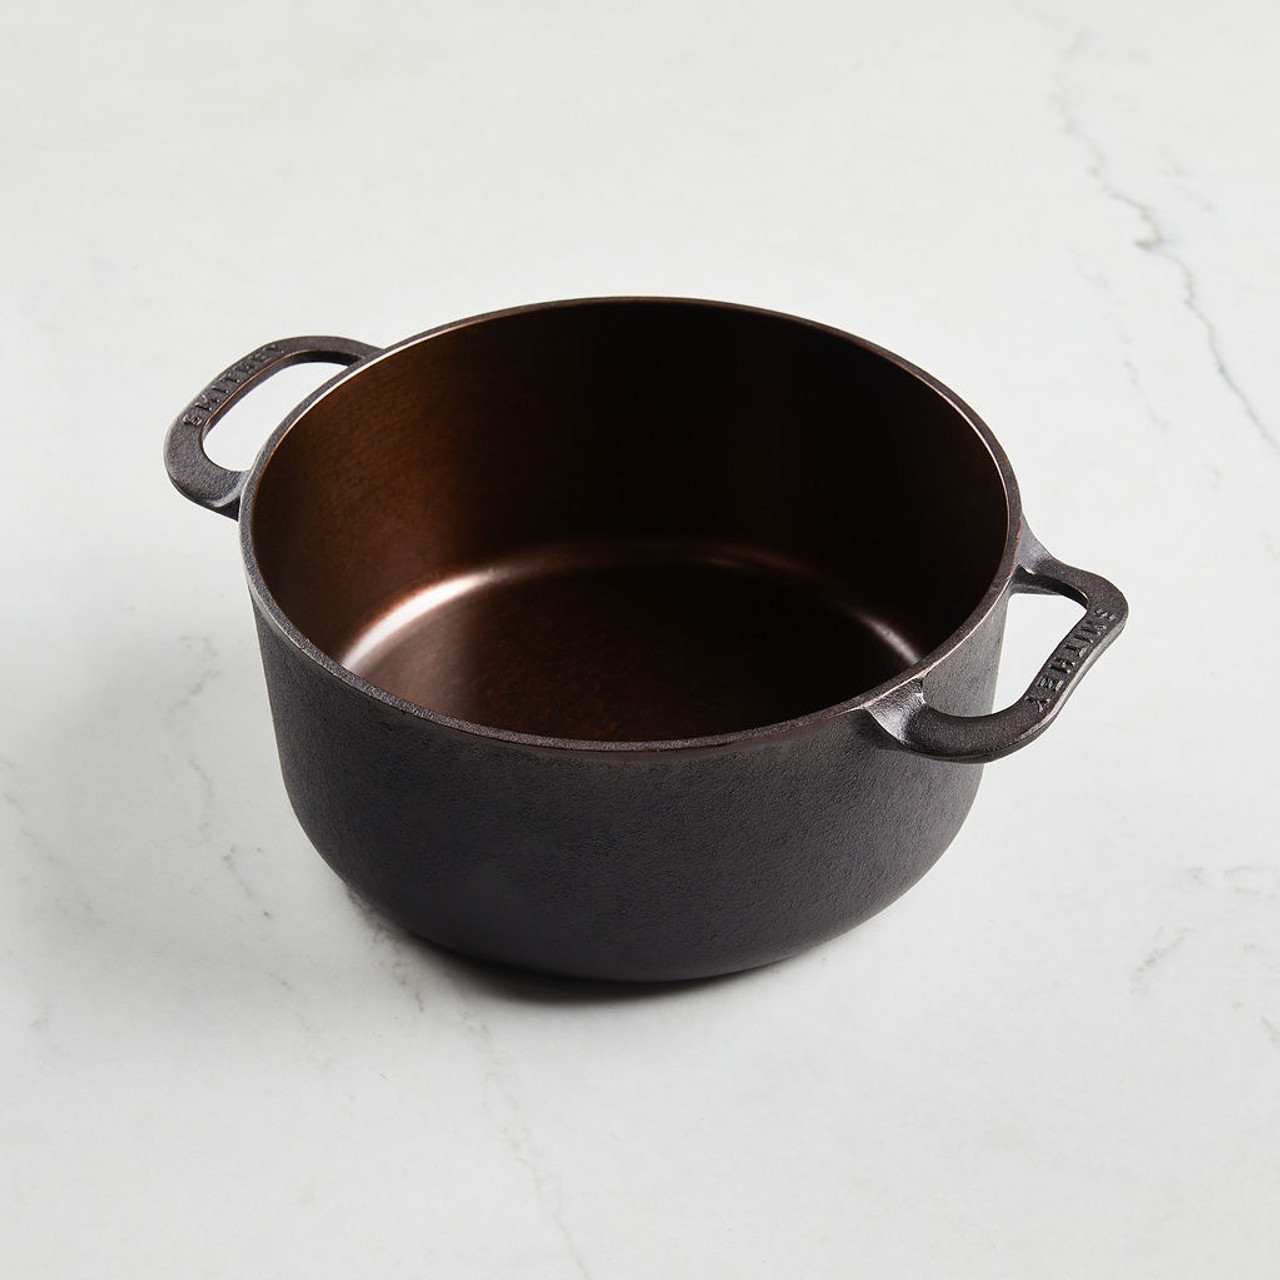 ARTISAN DESIGNED + MADE: SMITHEY CAST IRON + WOHL WOODWORKING